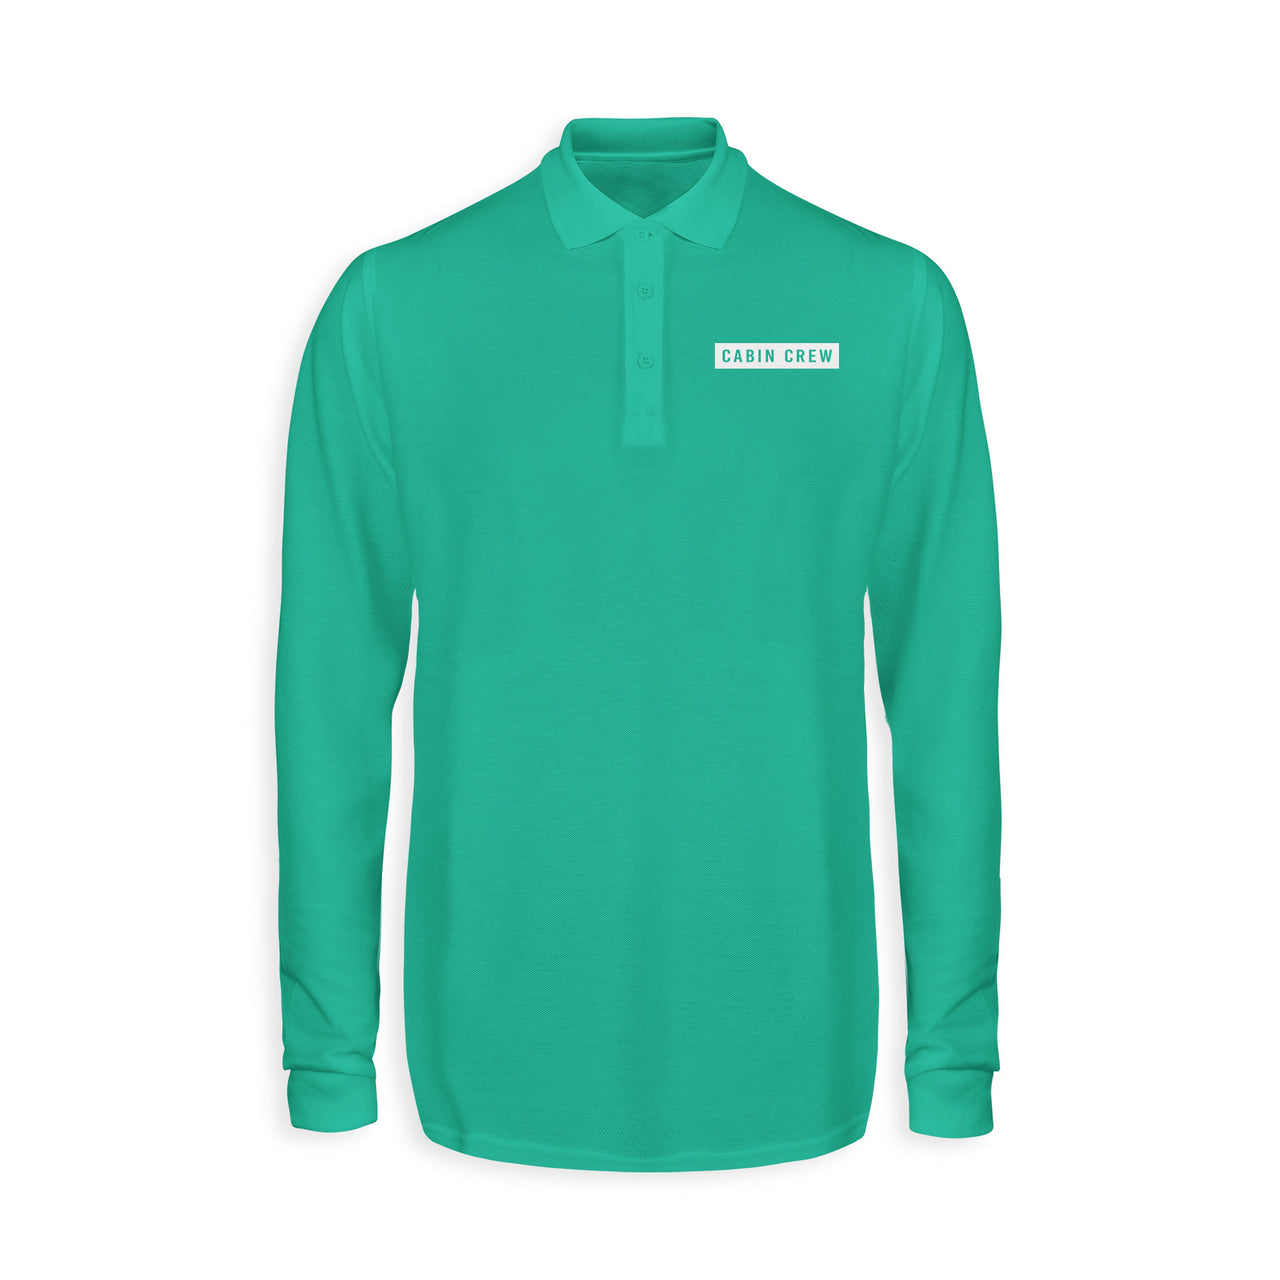 Cabin Crew Text Designed Long Sleeve Polo T-Shirts